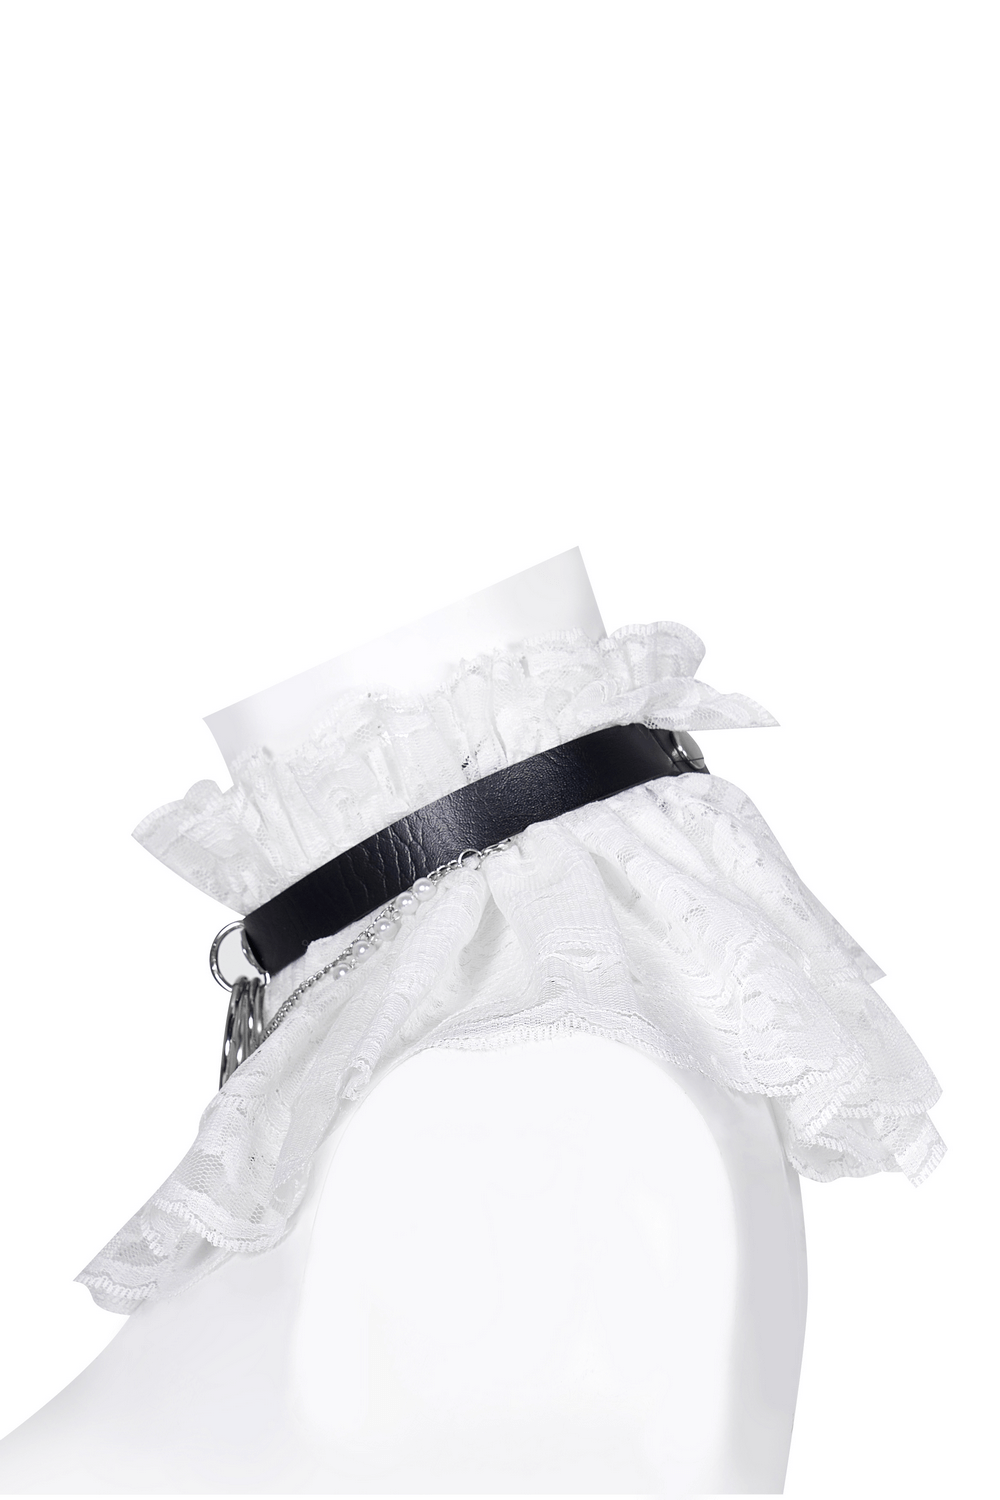 Women's Black Leather Choker with White Lace Collar